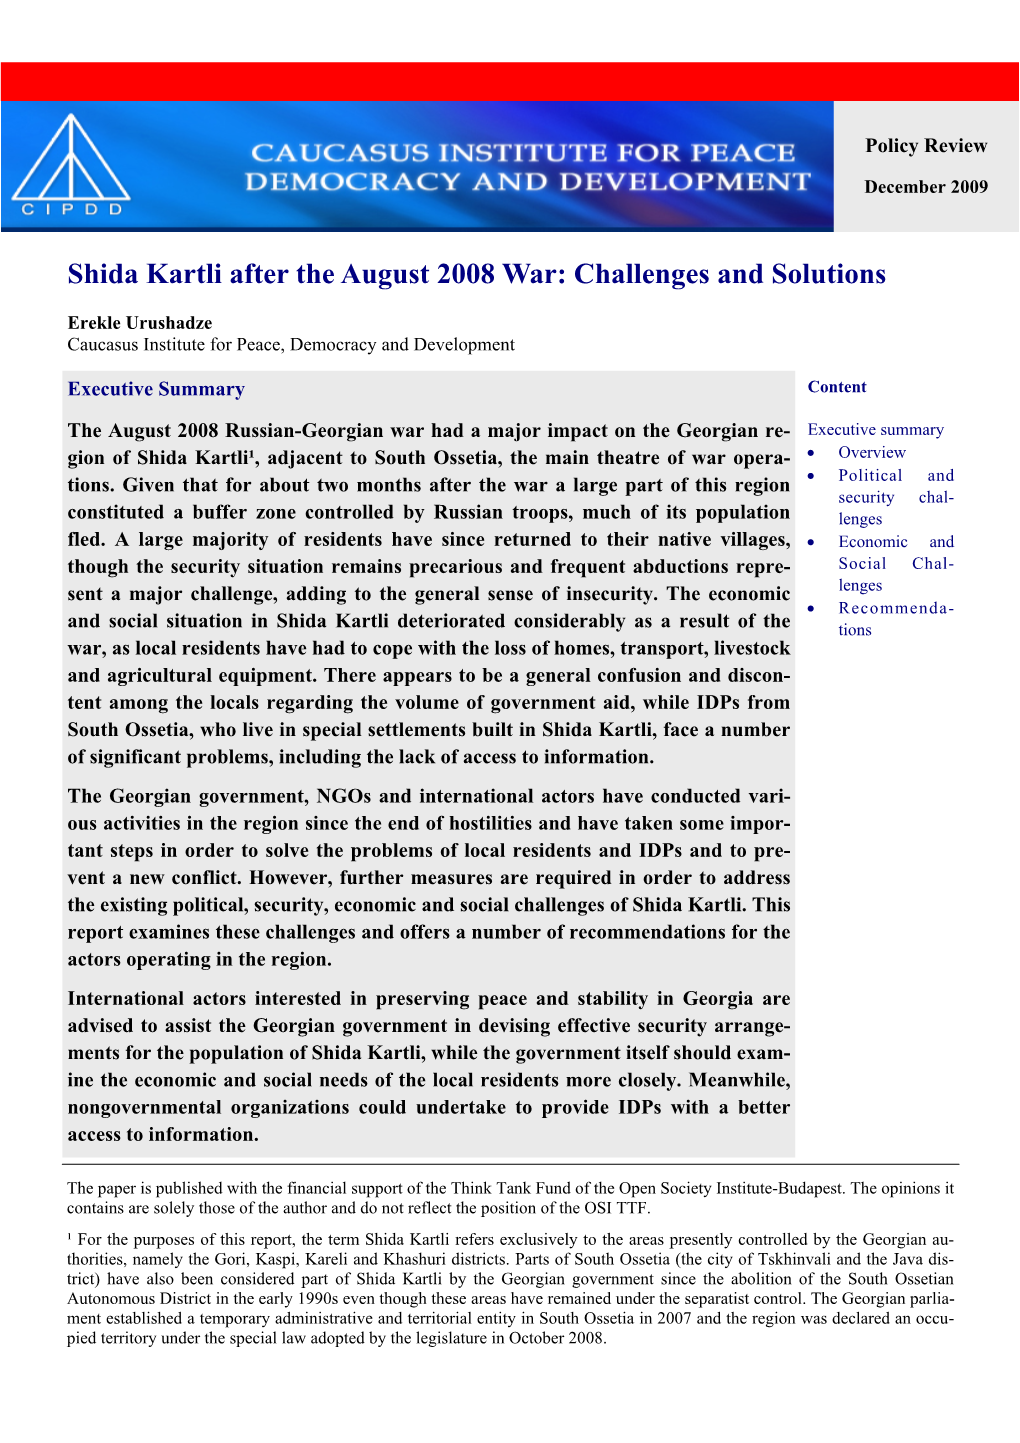 Shida Kartli After the August 2008 War: Challenges and Solutions